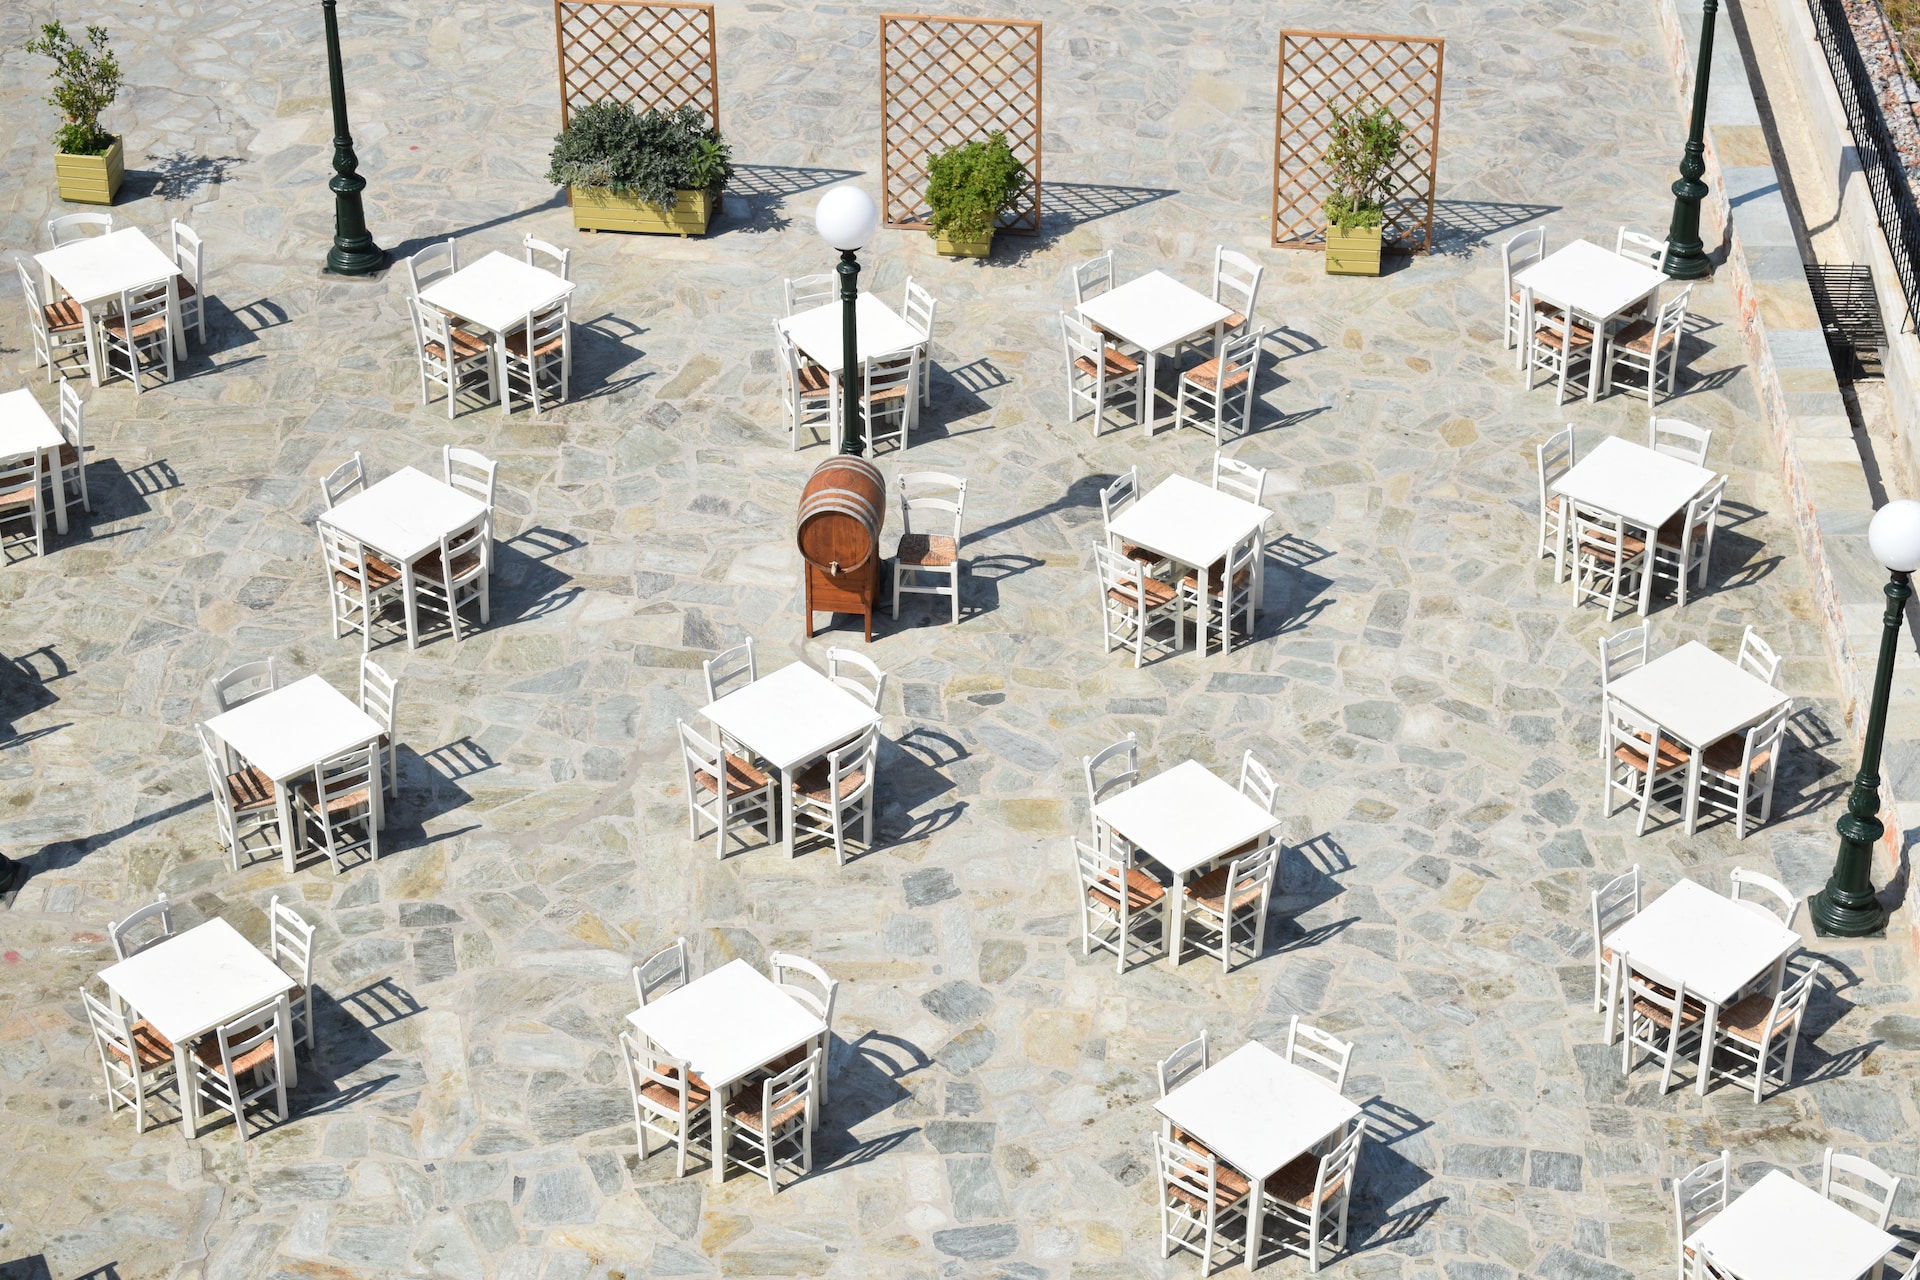 Photo of many small white tables in an outdoor courtyard